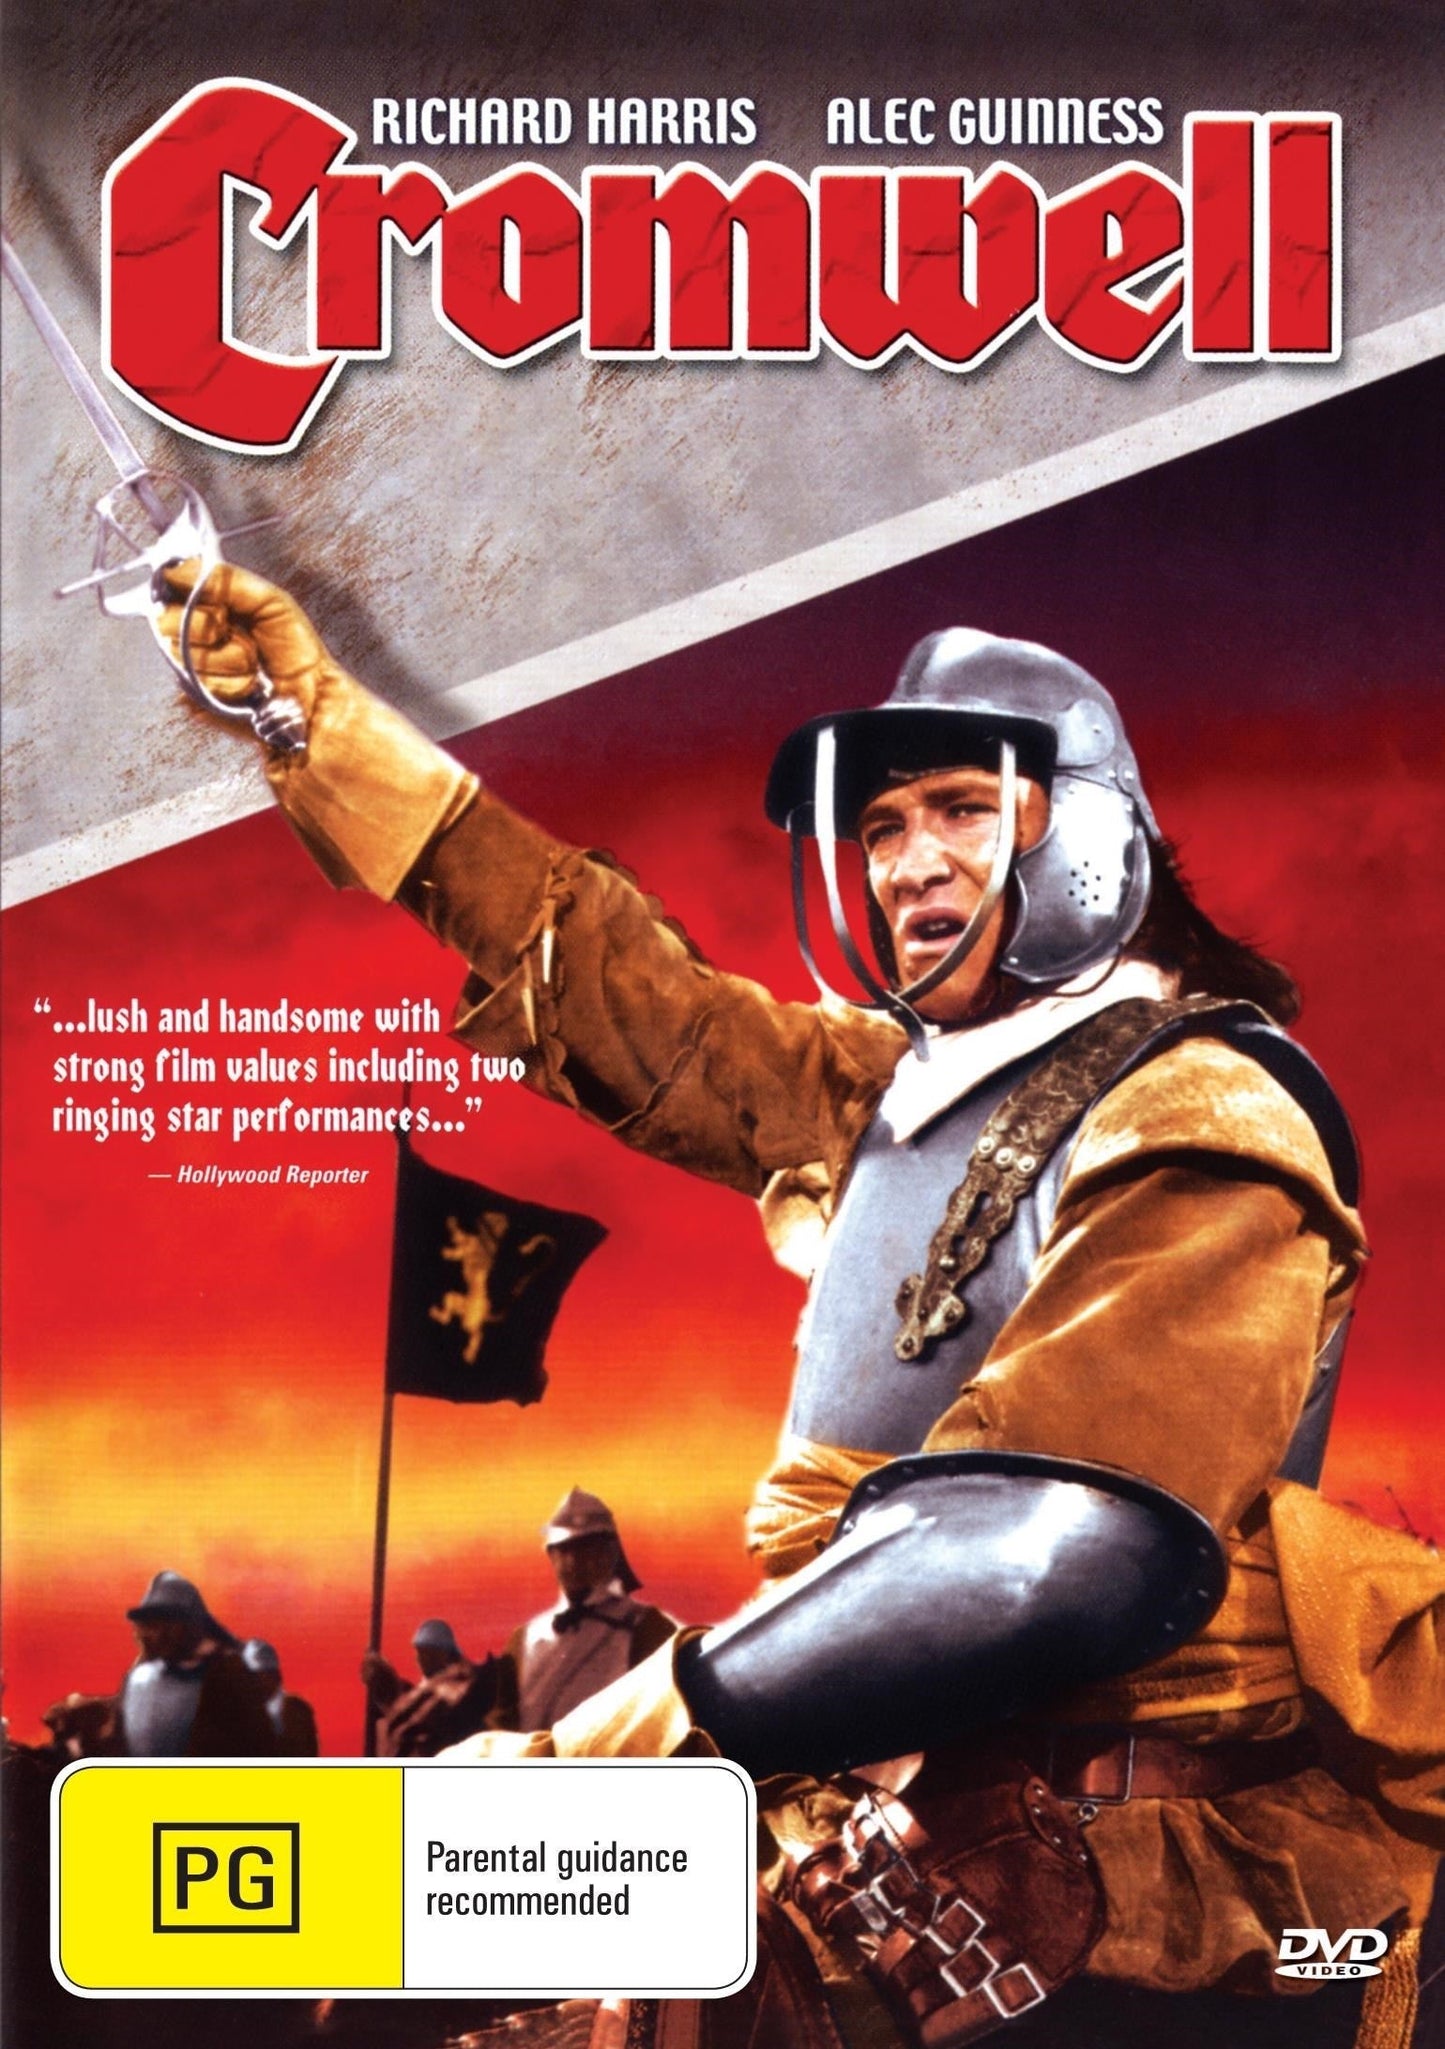 Cromwell rareandcollectibledvds